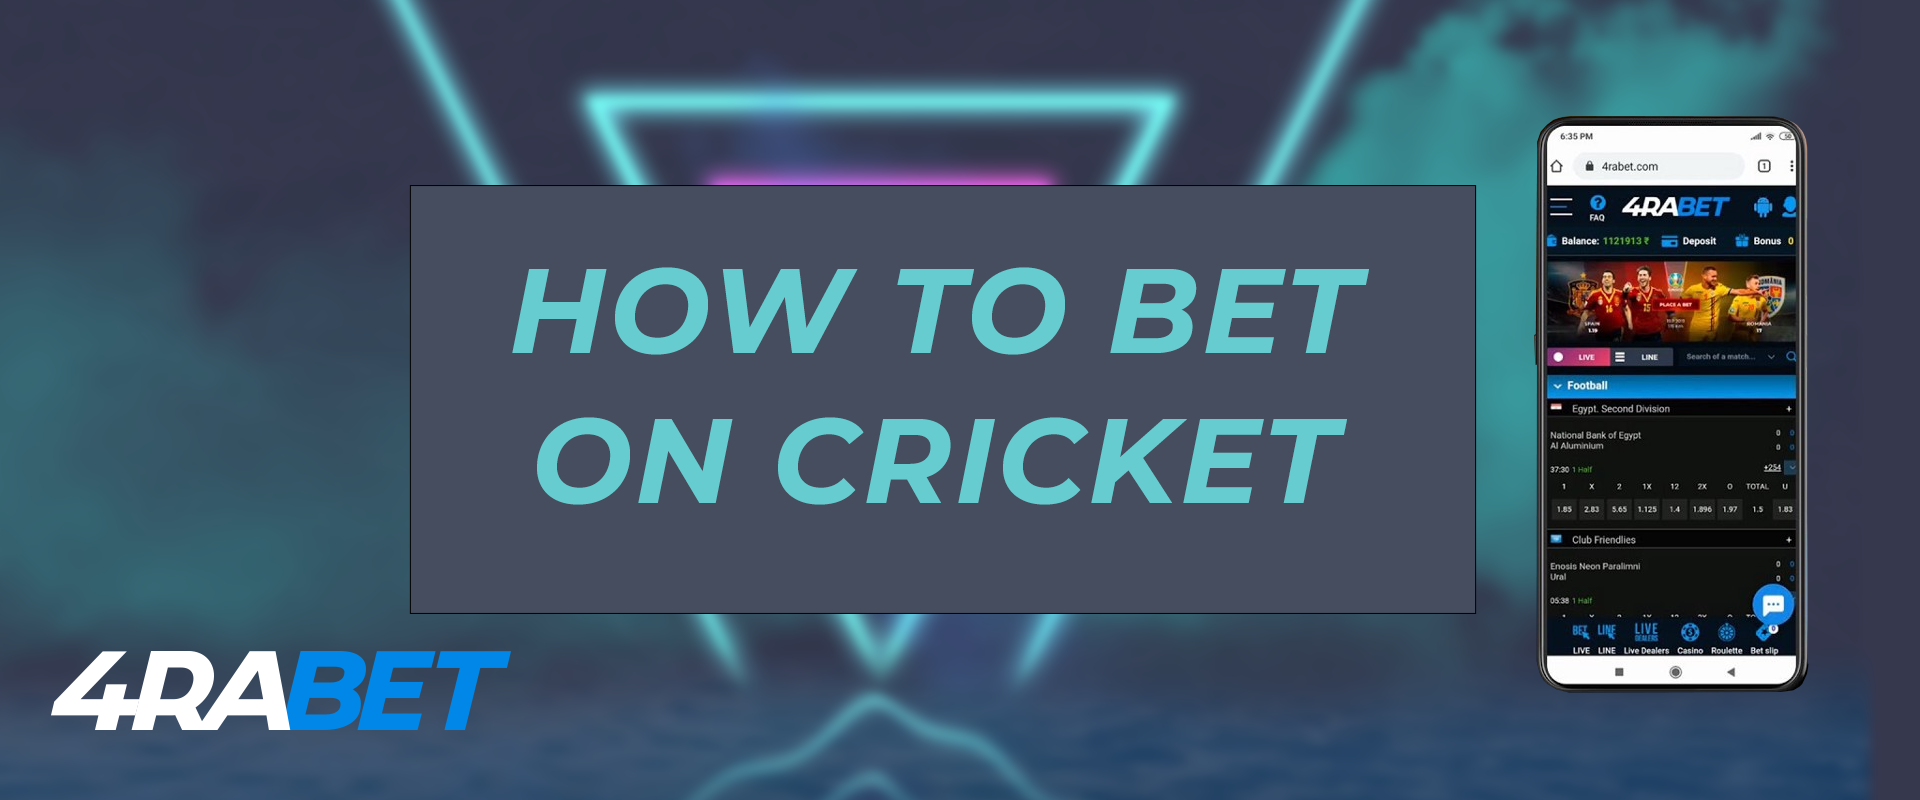 All information you should know before start betting on cricket on the 4rabet.